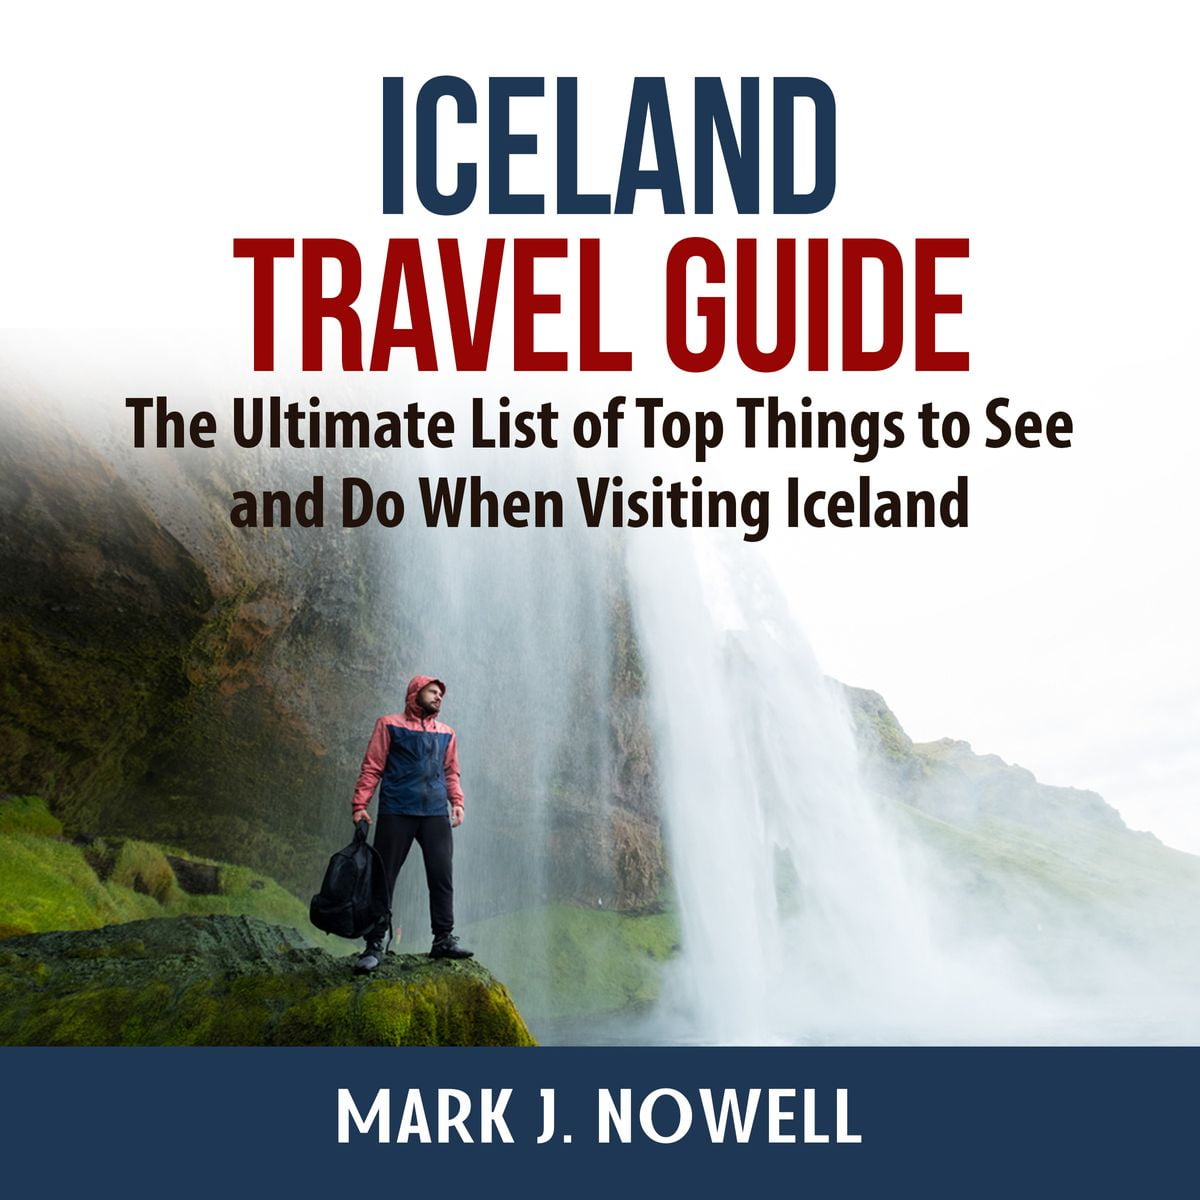 best iceland travel guide book